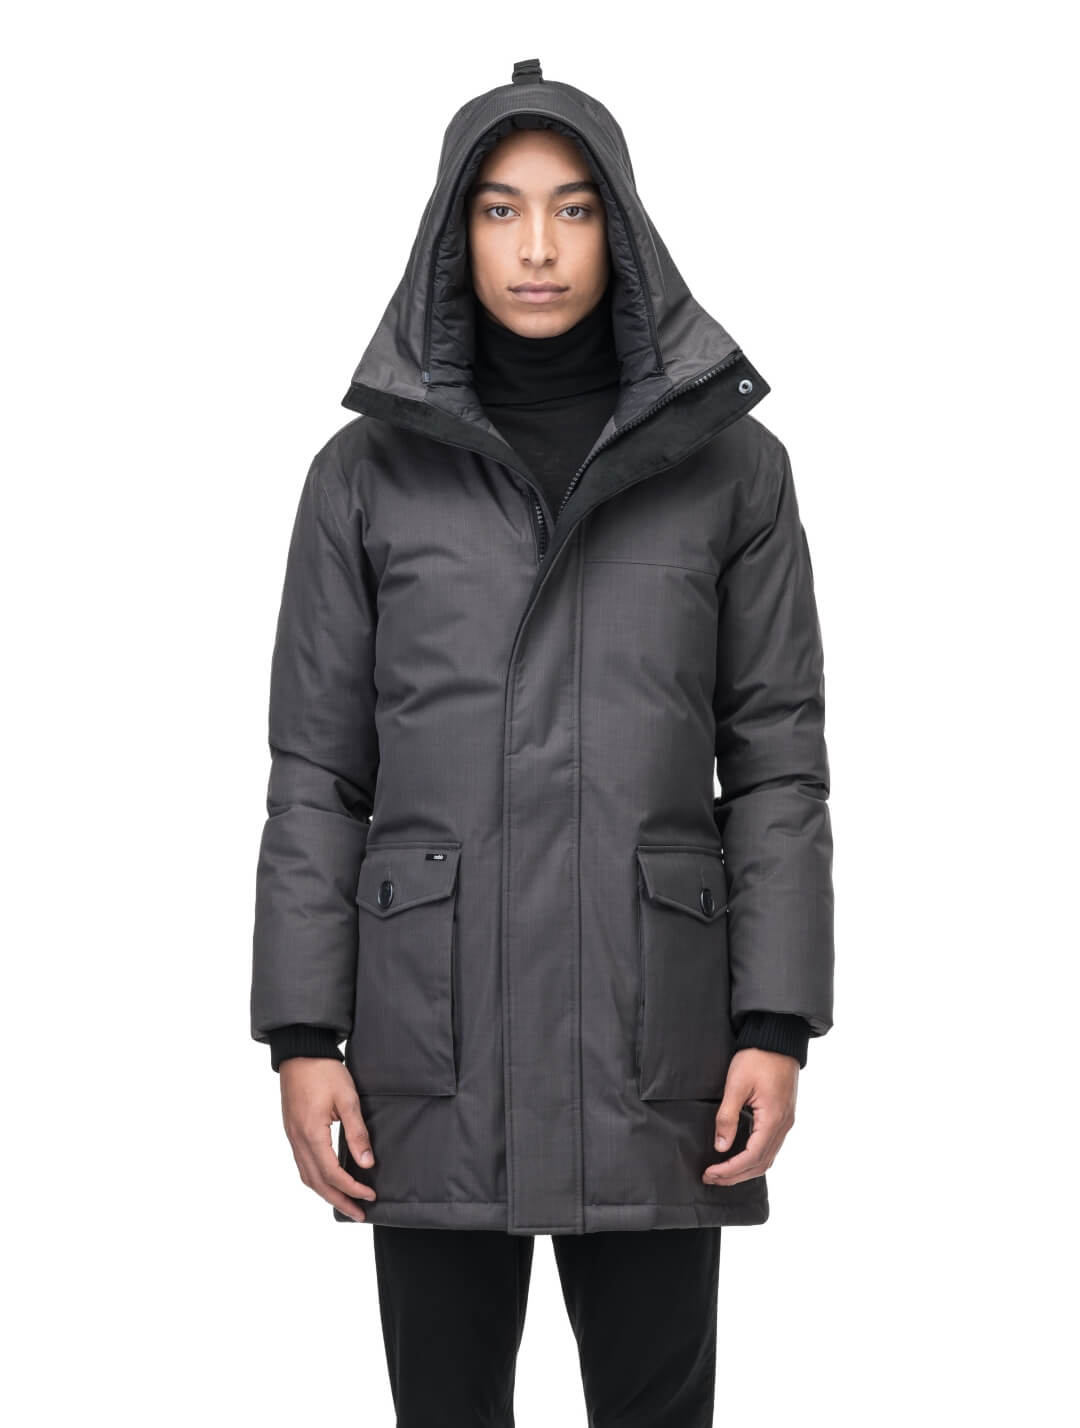 Men's slim fitting waist length parka with removable fur trim on the hood and two waist patch pockets in CH Steel Grey